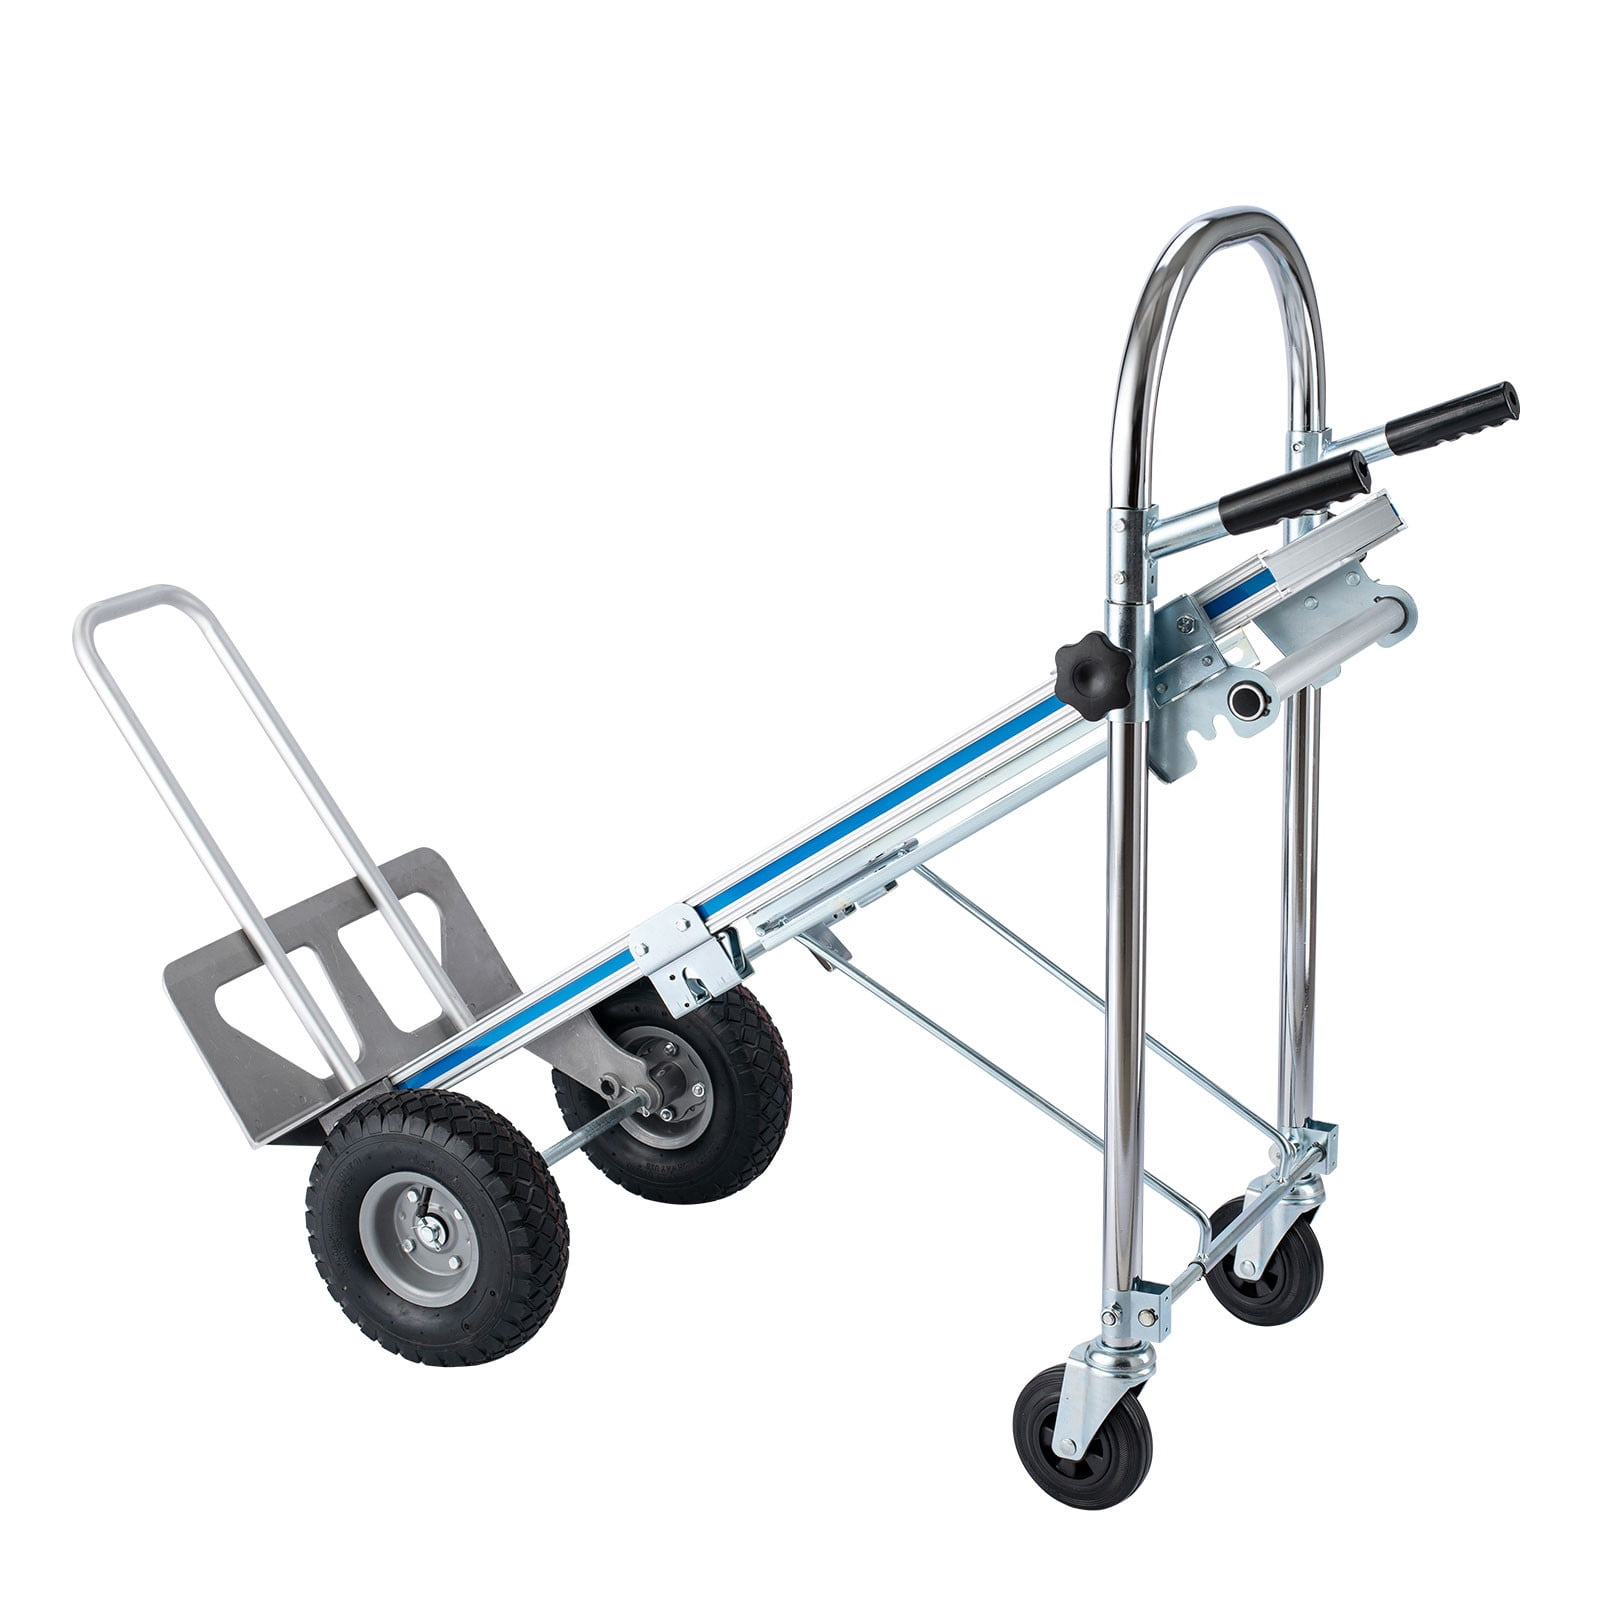 Details about   3in1 Heavy Duty Foldable Car Aluminum Folding Sack Truck Hand Trolley Cart 